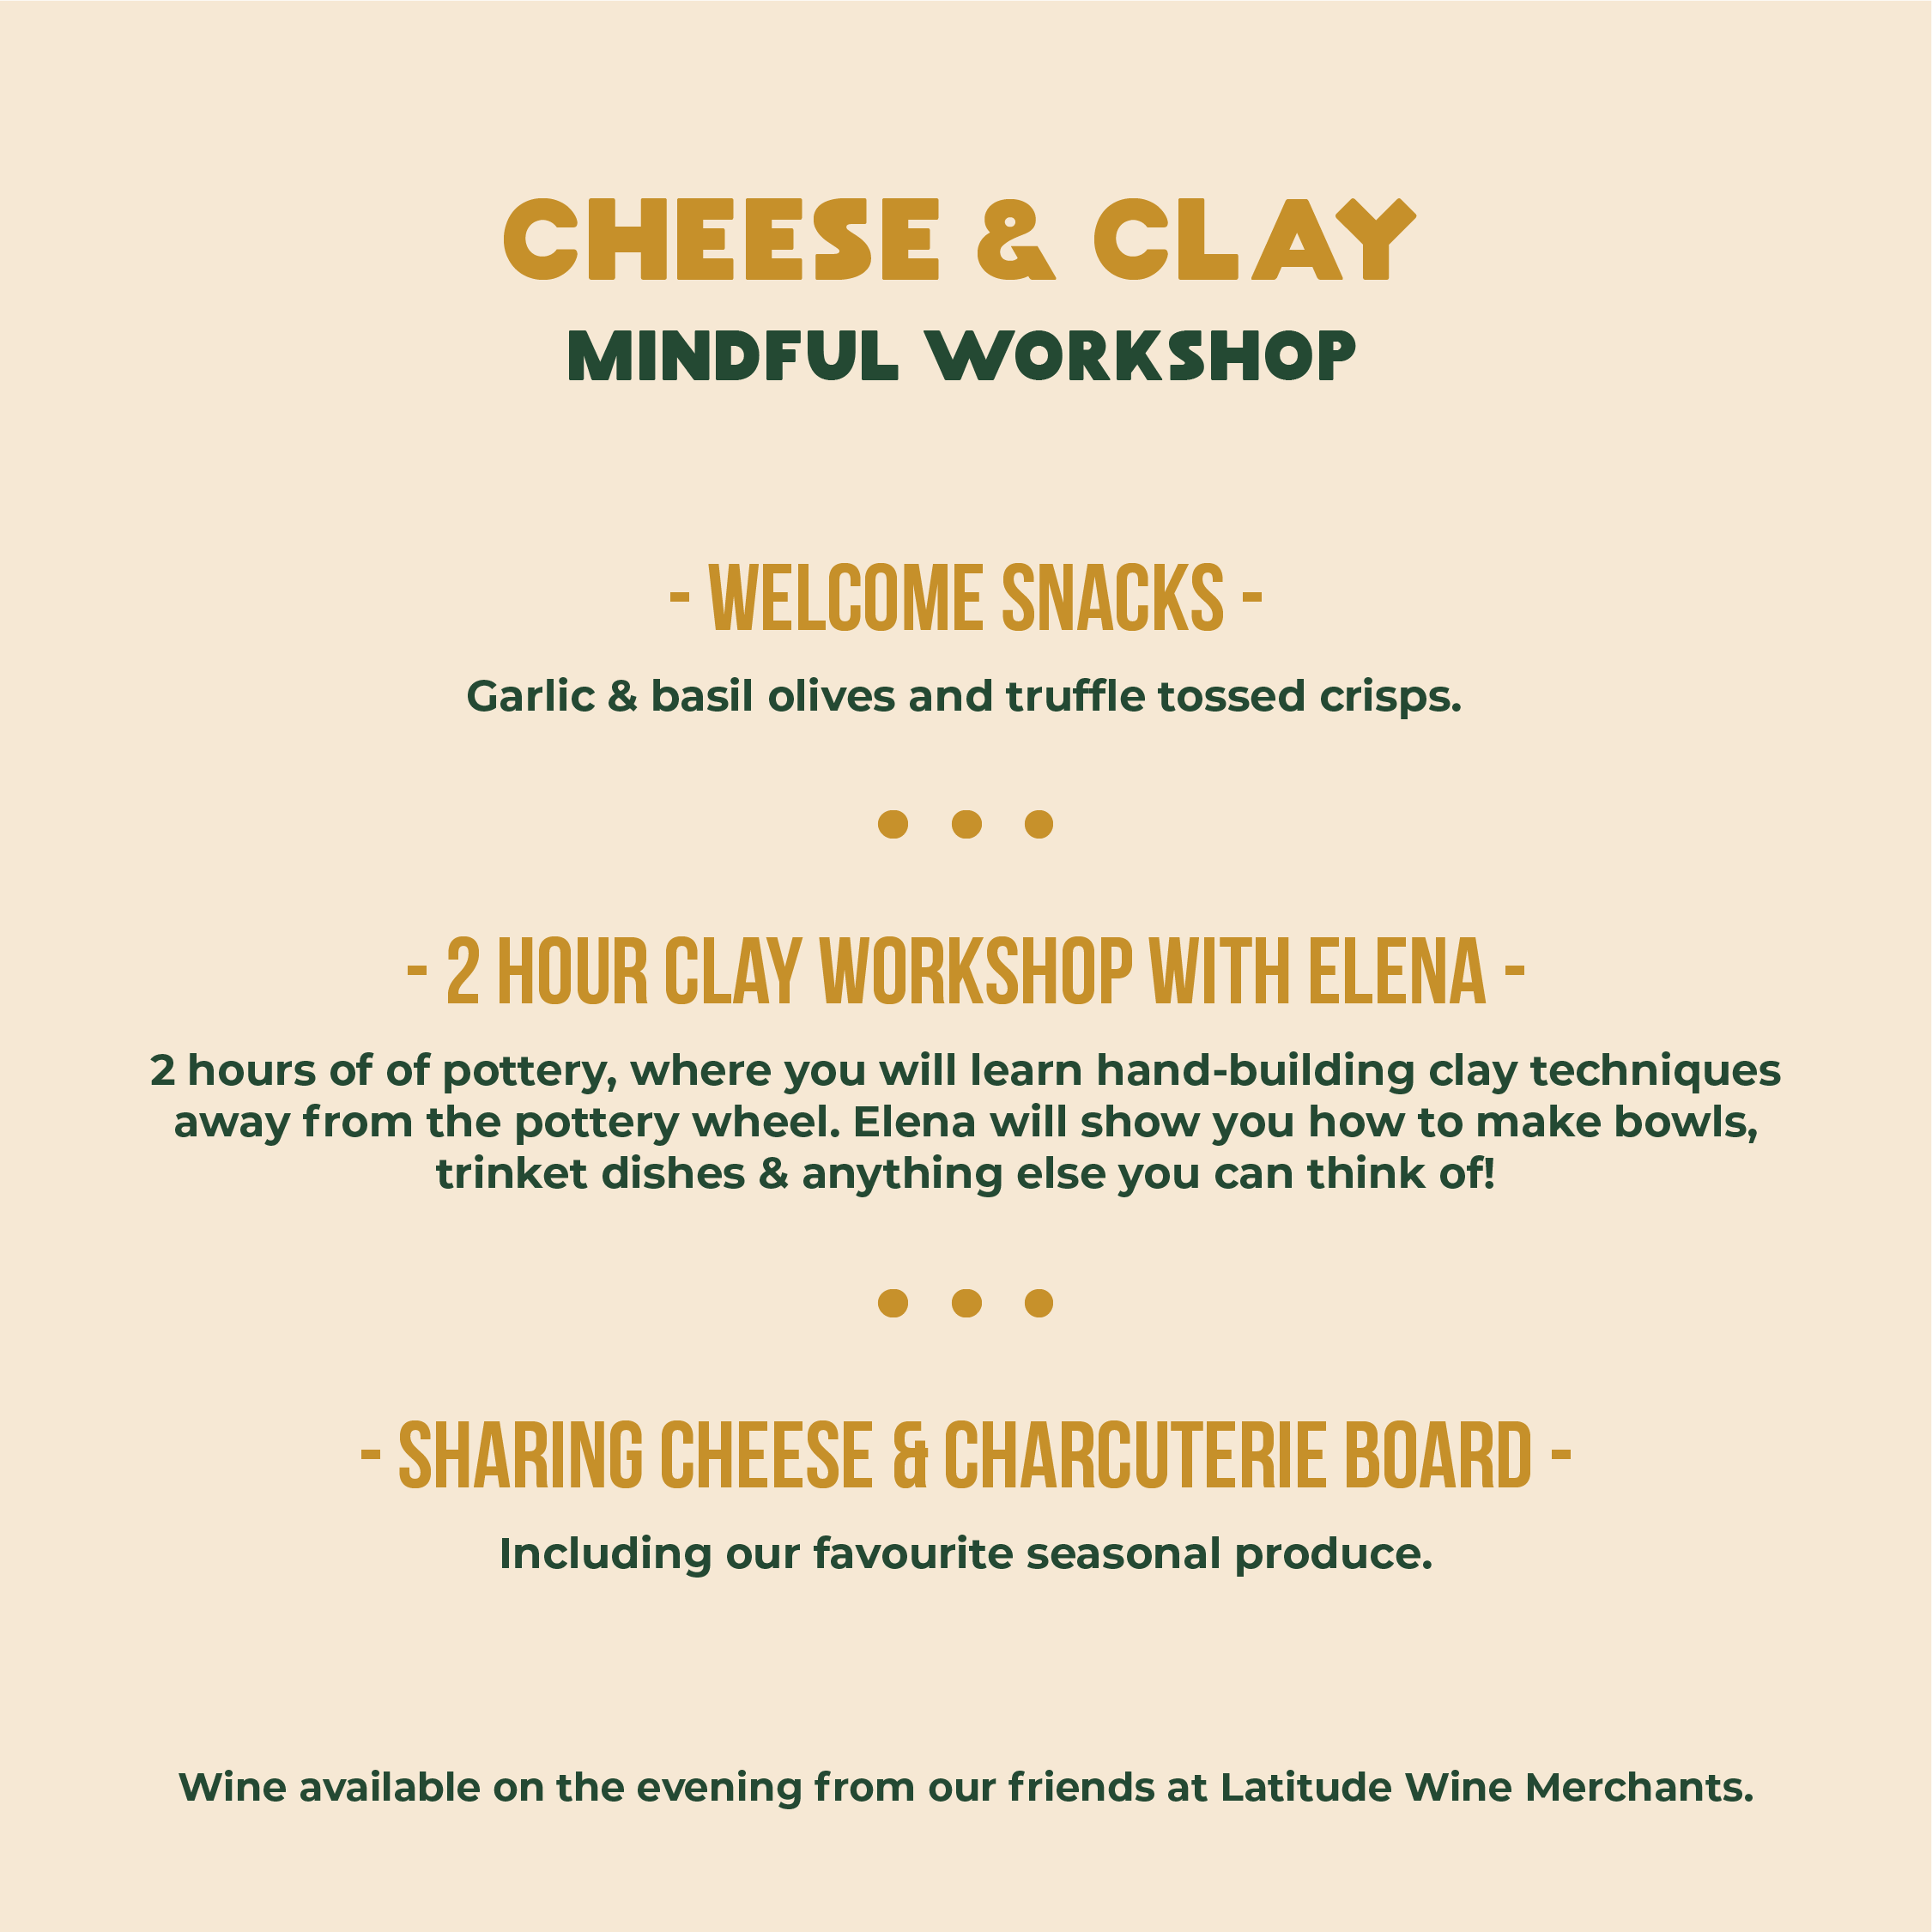 Cheese & Clay Night - 21st March - Leeds Corn Exchange